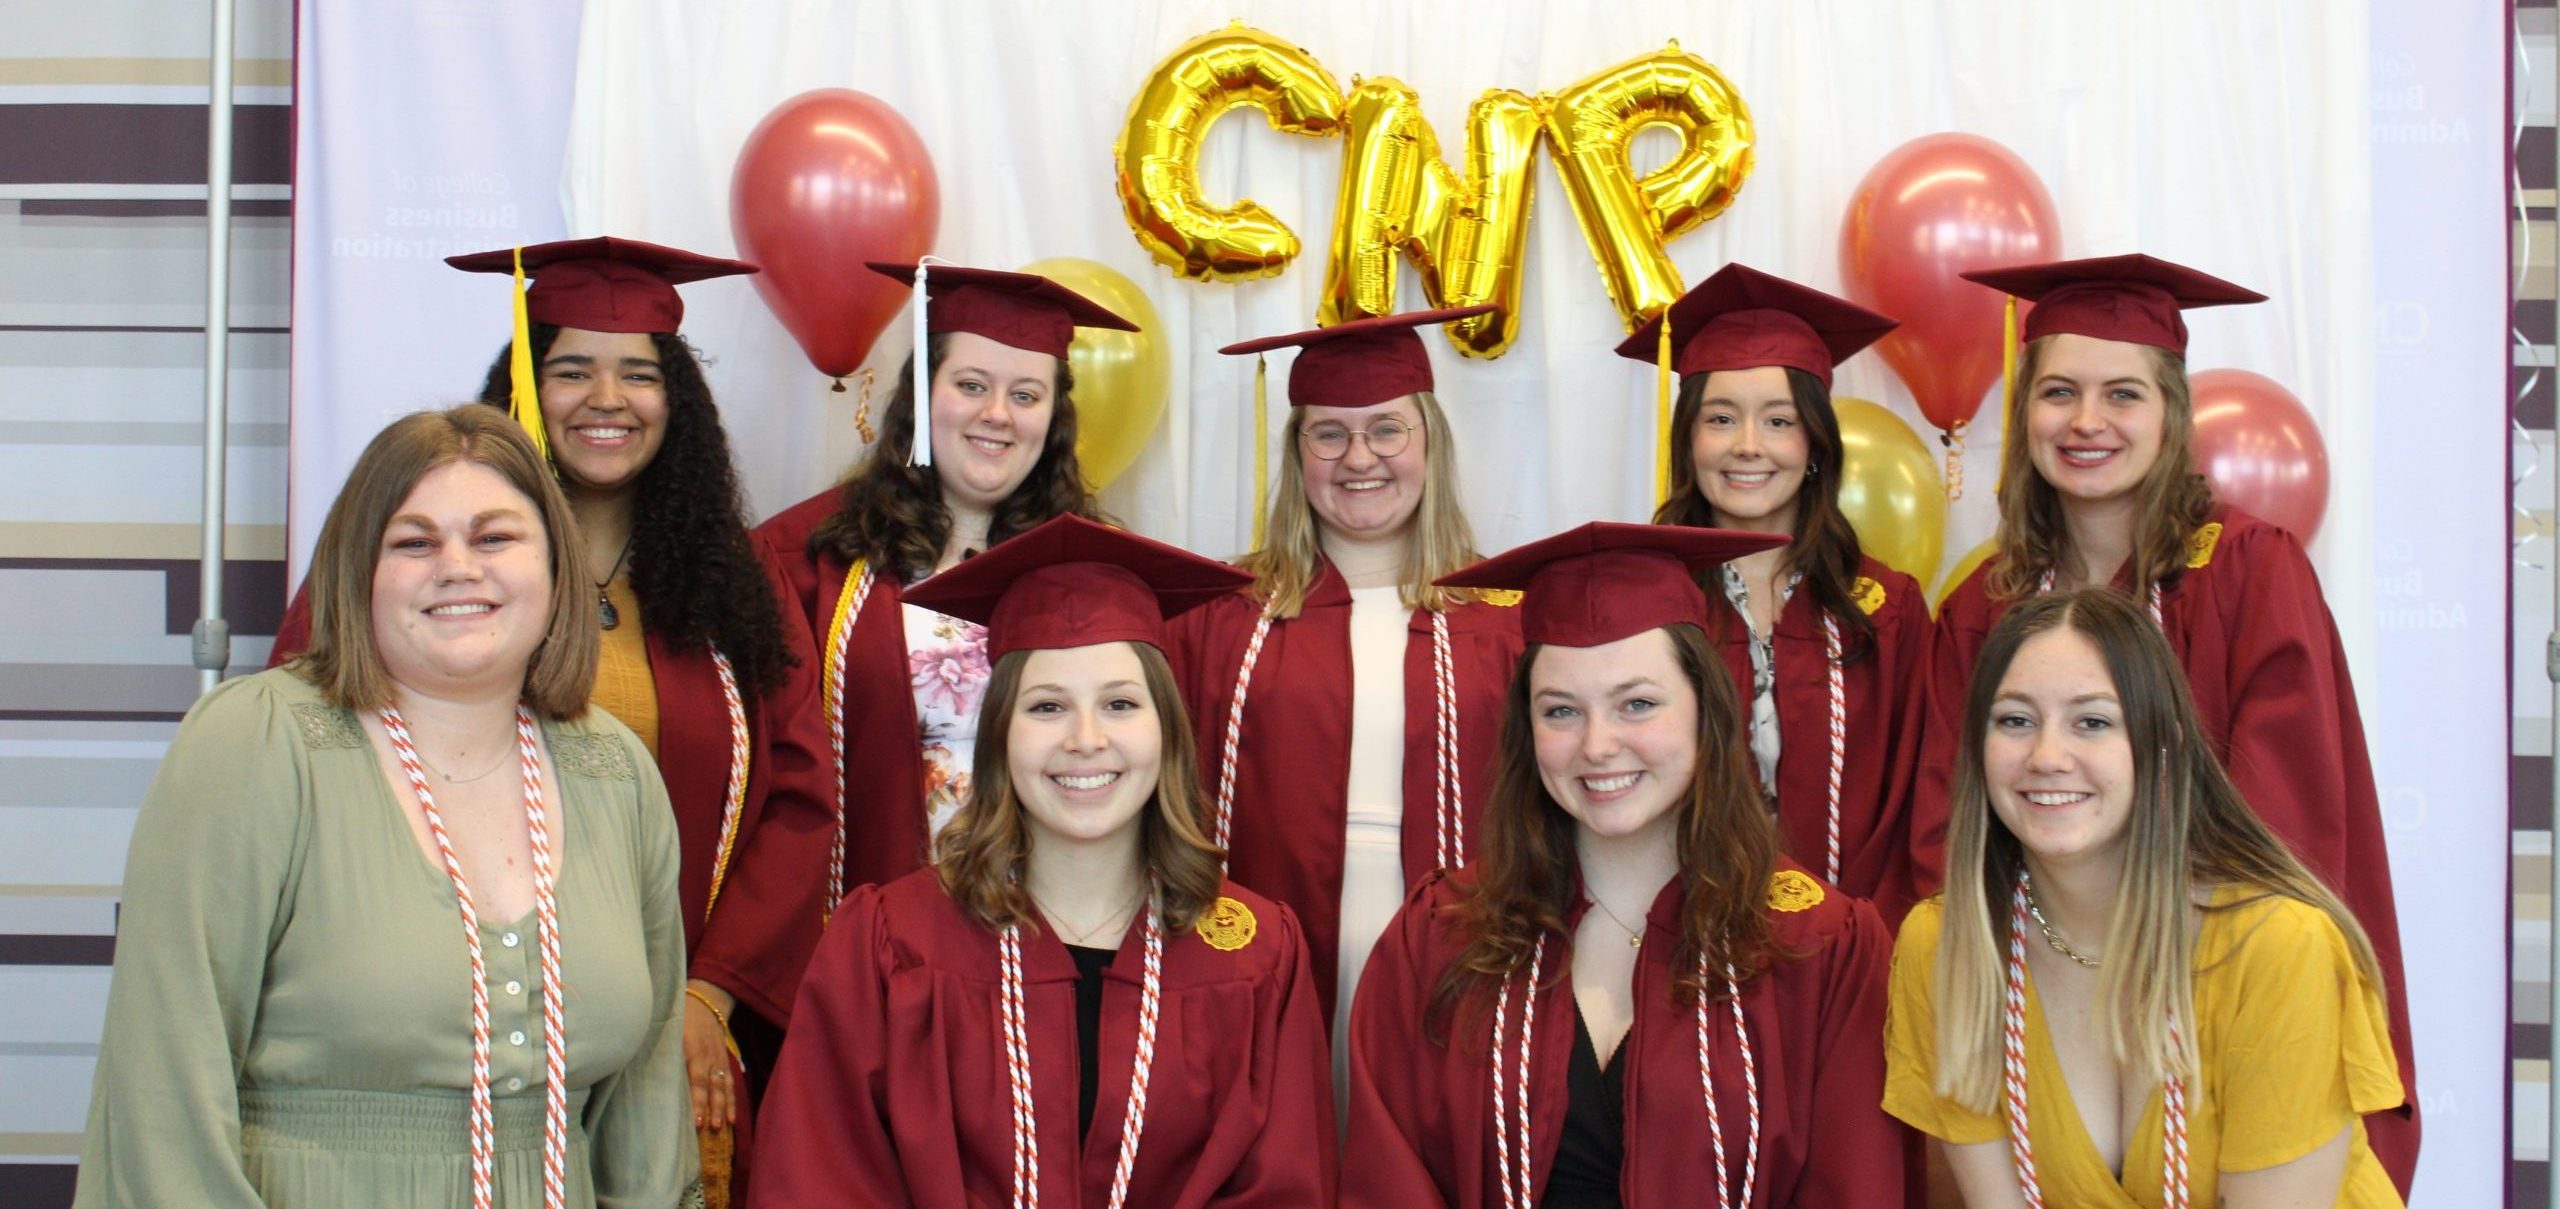 A group of nonprofit management students celebrating earning their CNP credential at Central Michigan University